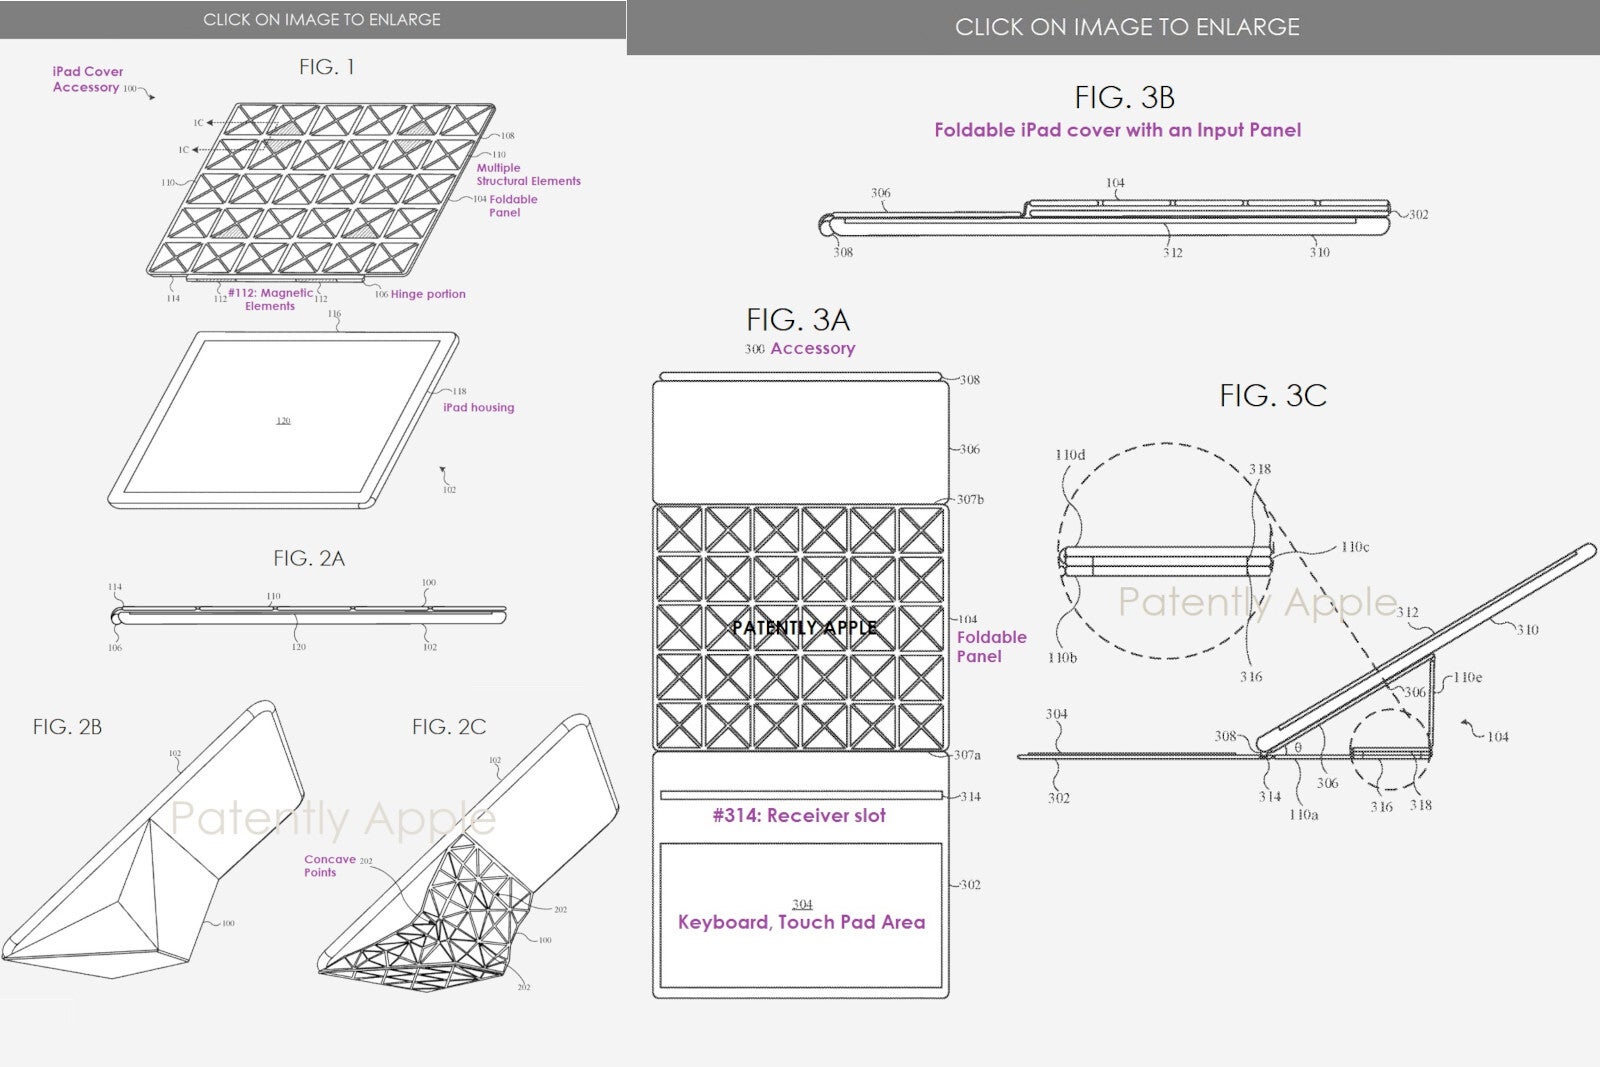 Apple patents iPad cover that can morph into different shapes